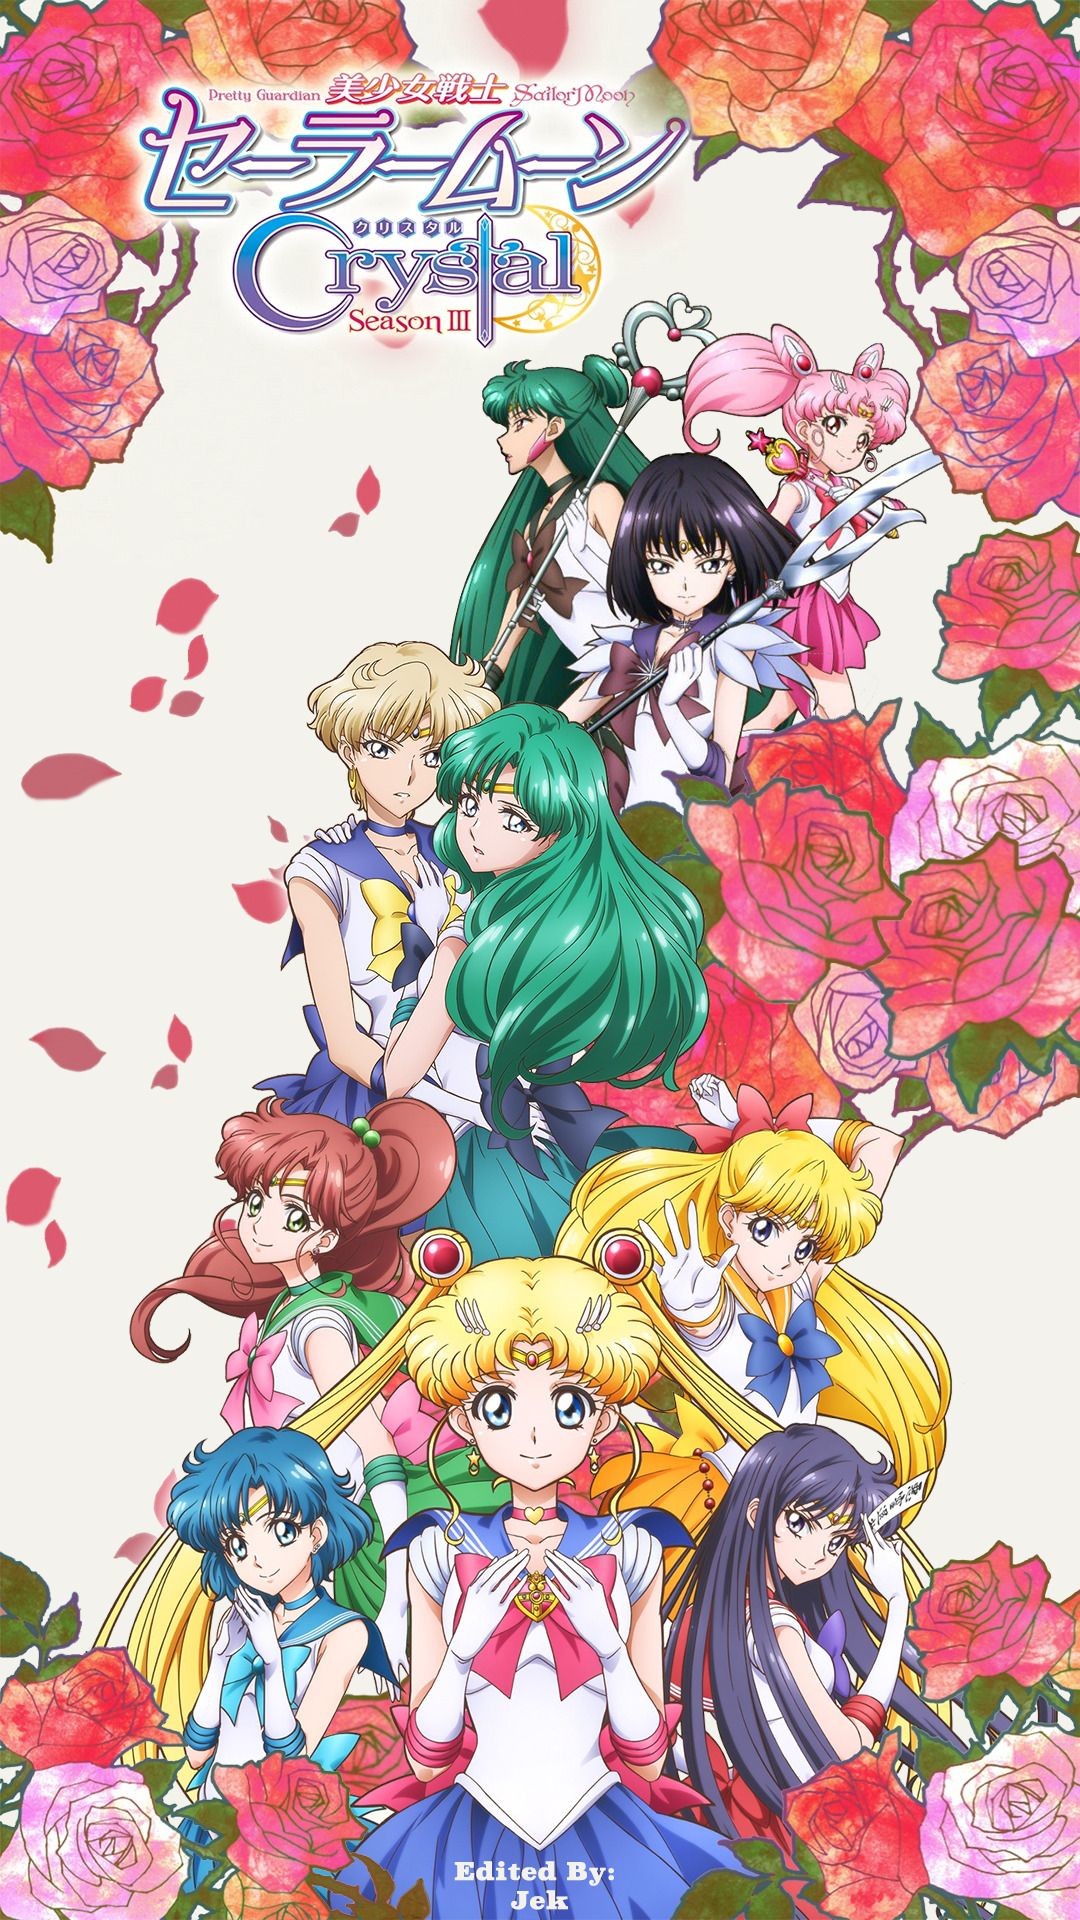 1080x1920 Finished: Sailor Moon Crystal Season 3 iPhone Wallpaper. PM me for the  image…